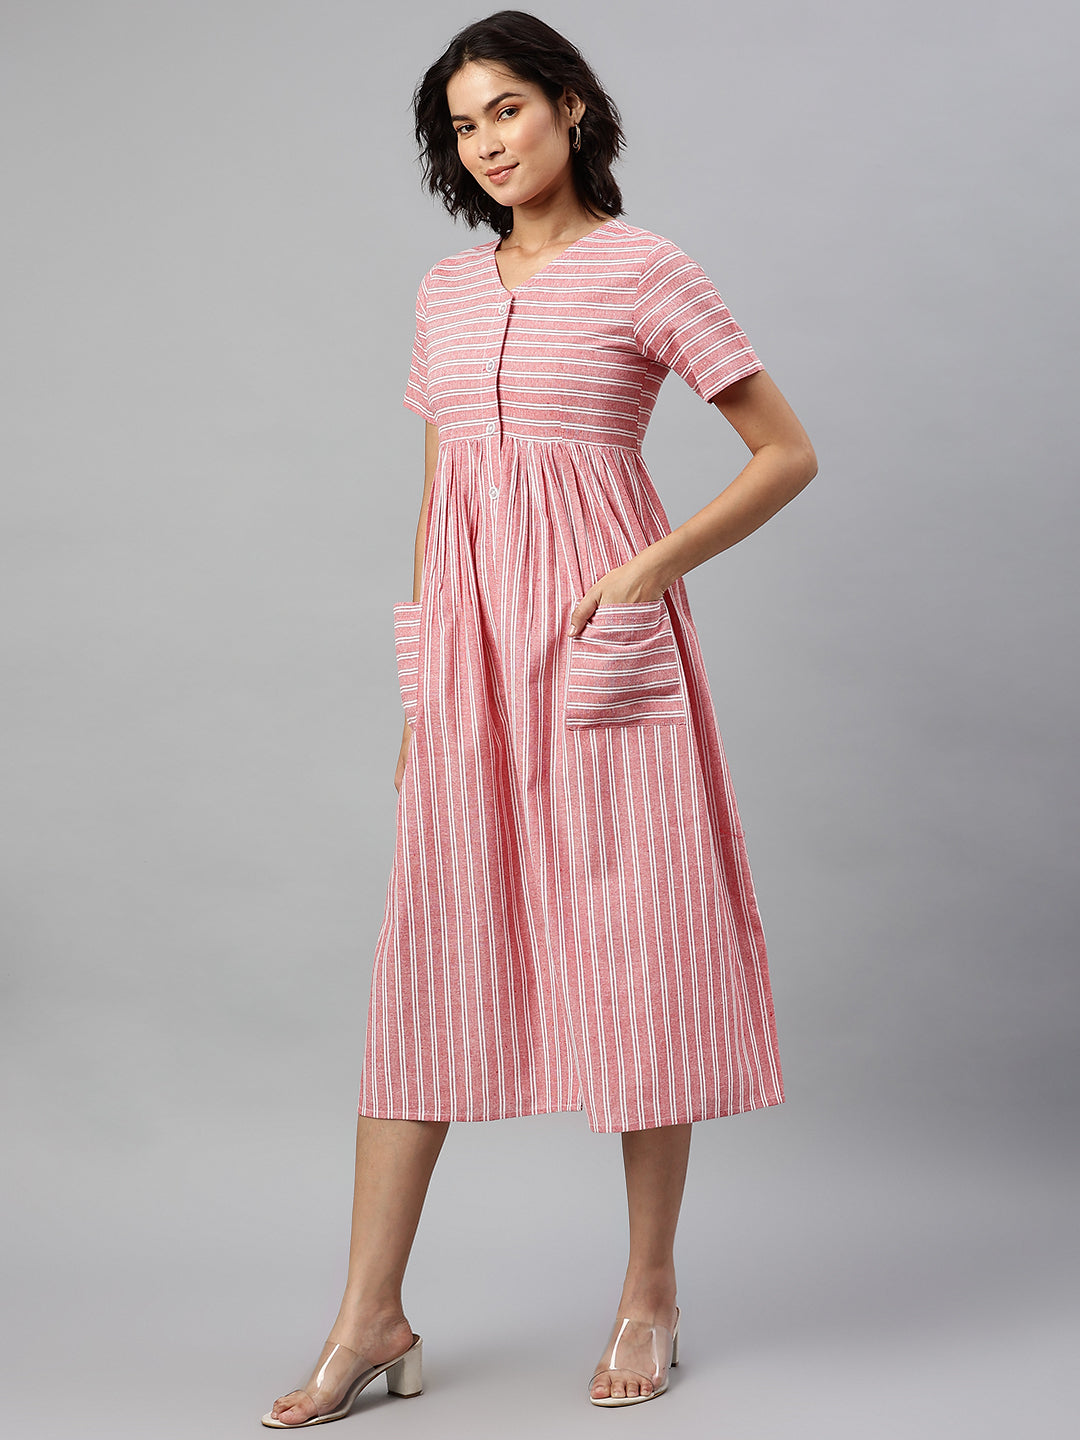 Buy Off White Striped Tiered Midi Dress For Women Online - Zink London